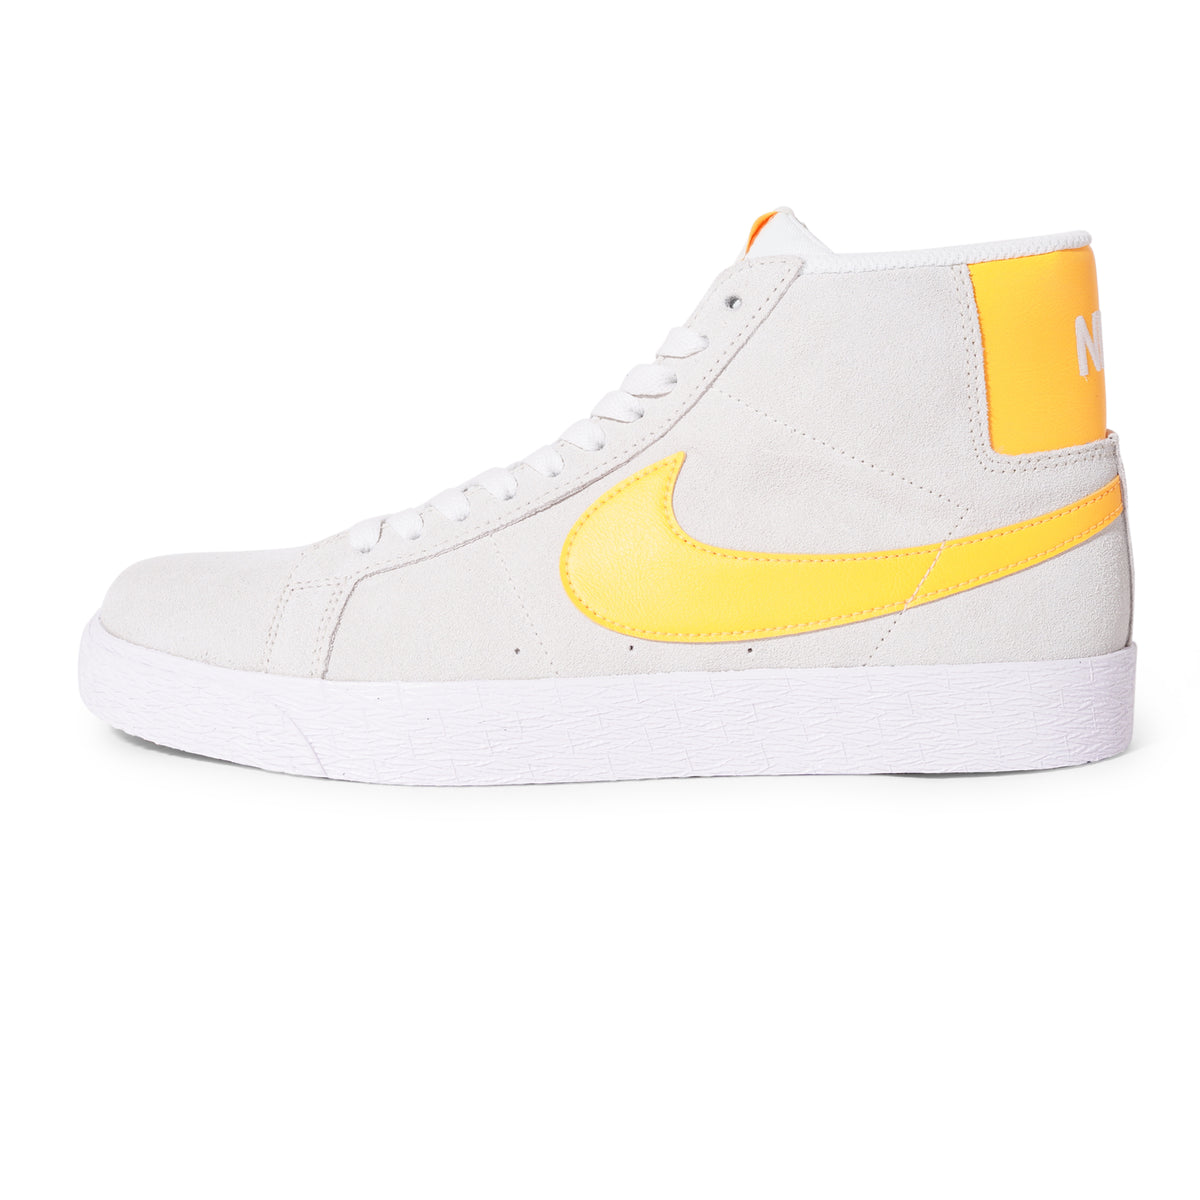 We have a huge choice of Zoom Blazer Mid, Summit White / Laser